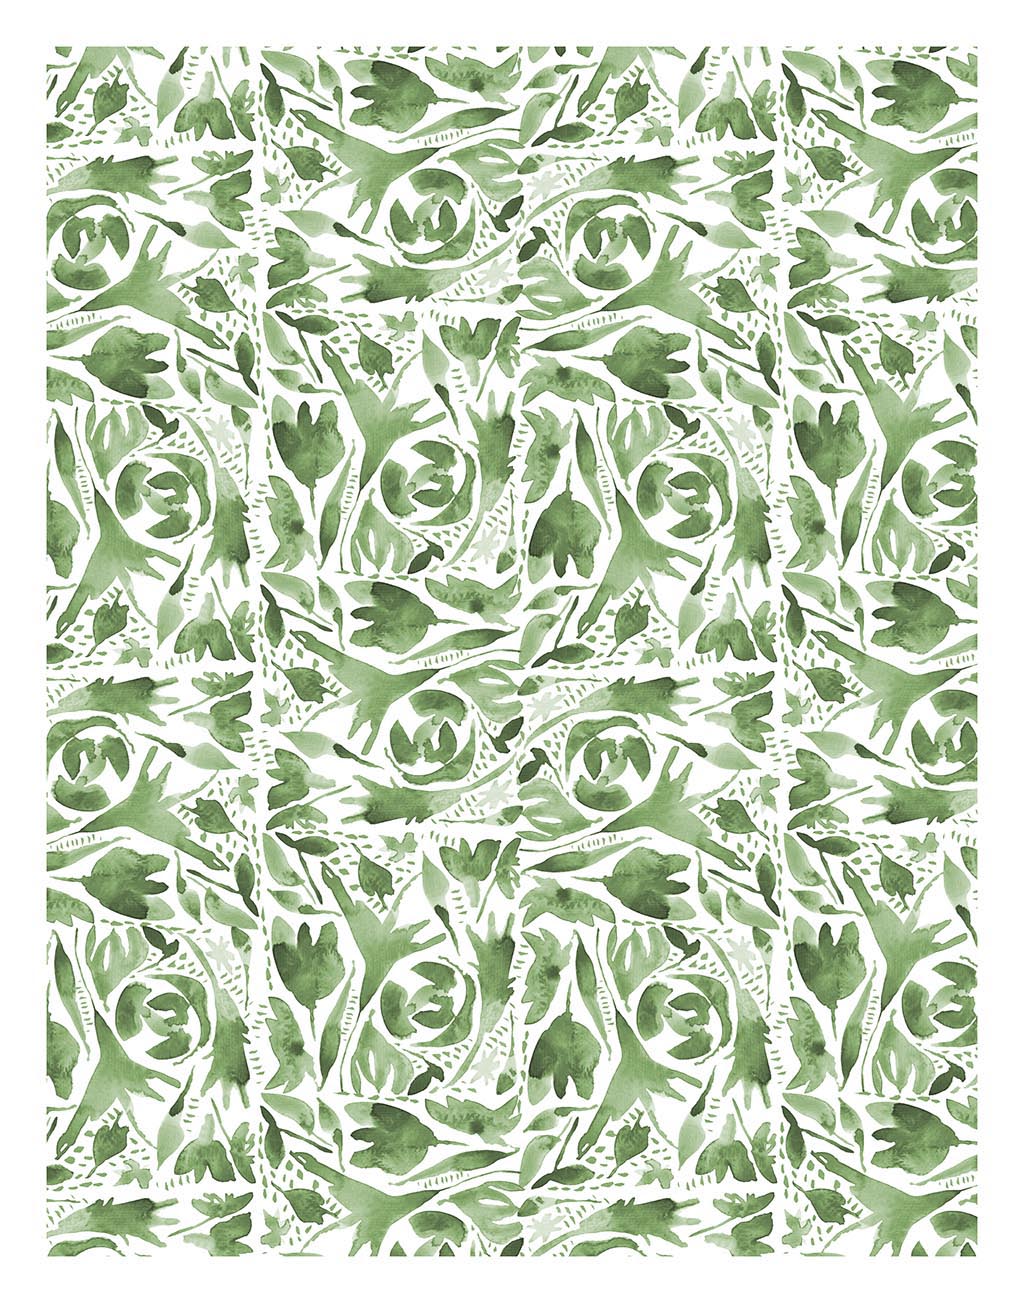 Repeating watercolor floral design in sage greens. Print measures 11x14 inches